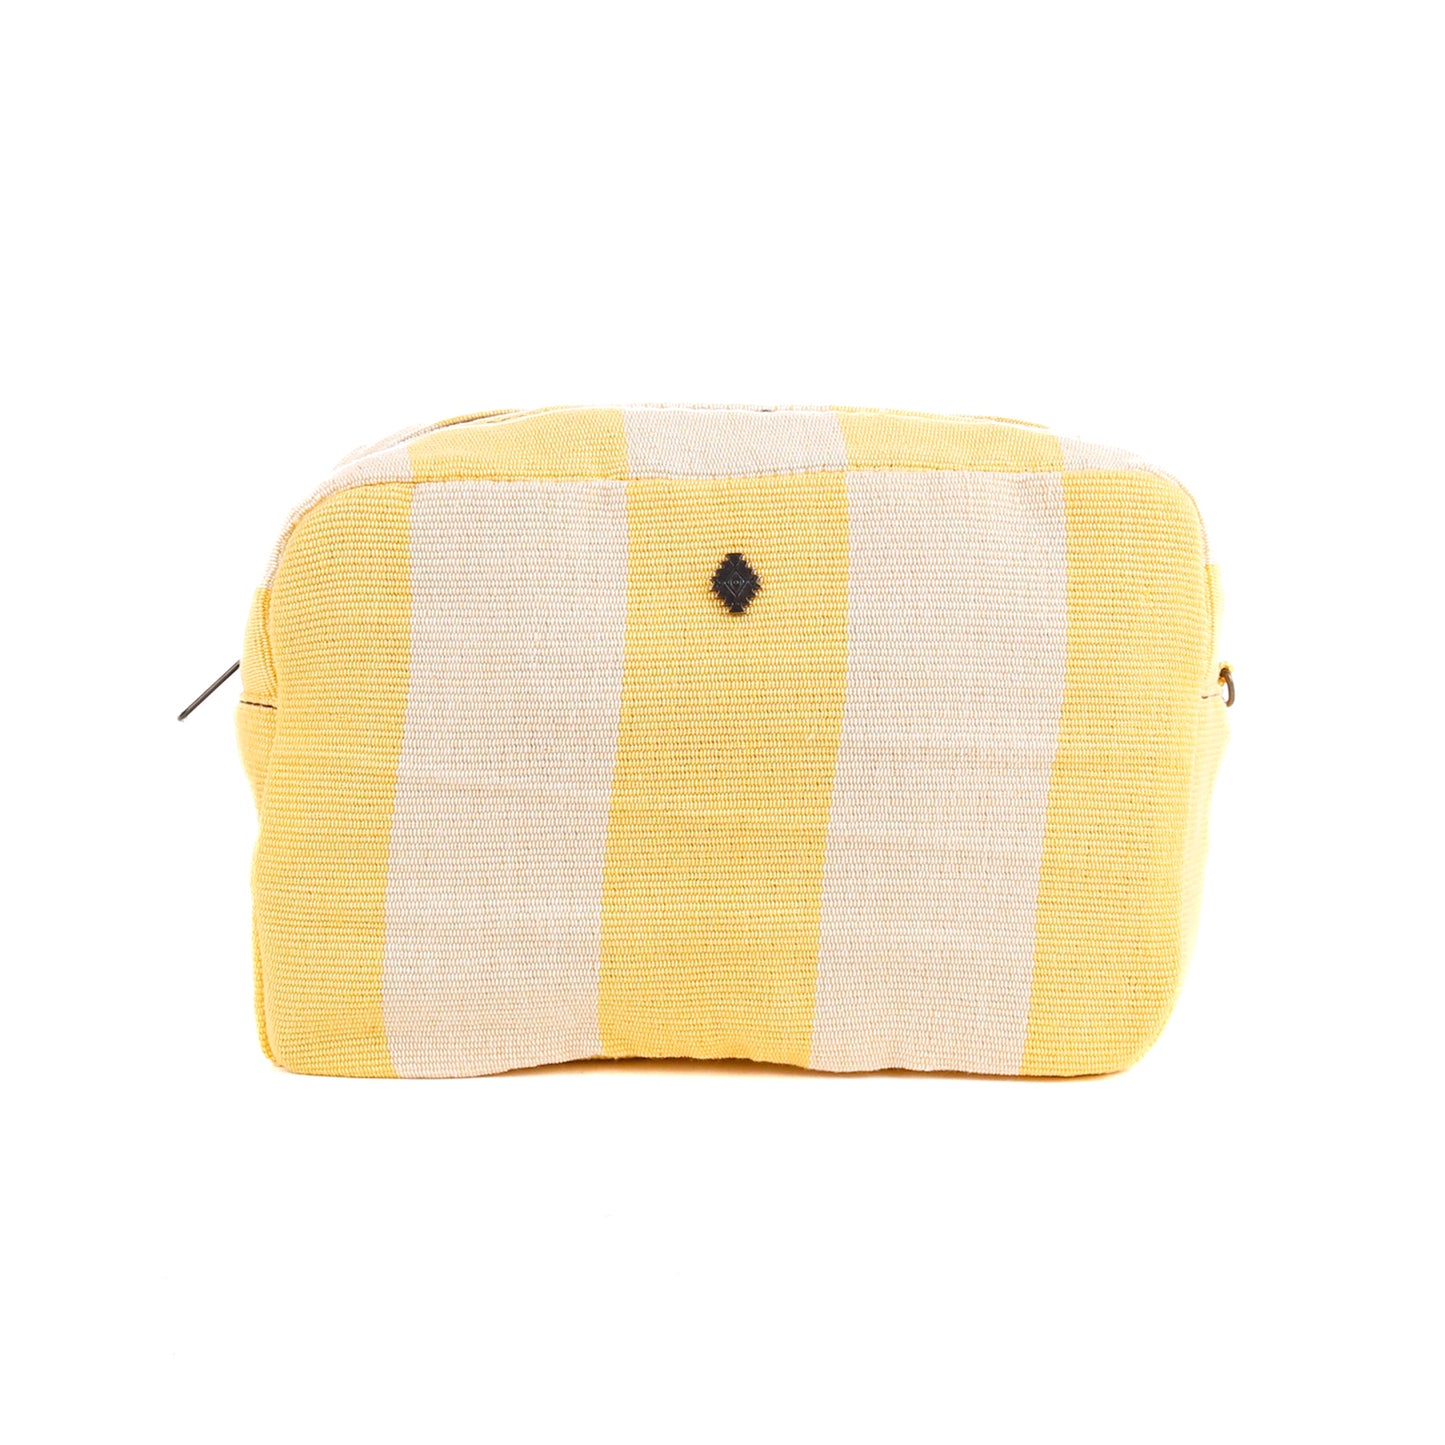 THE PERFECT WET BAG - SMALL - CABANA STRIPE - YELLOW